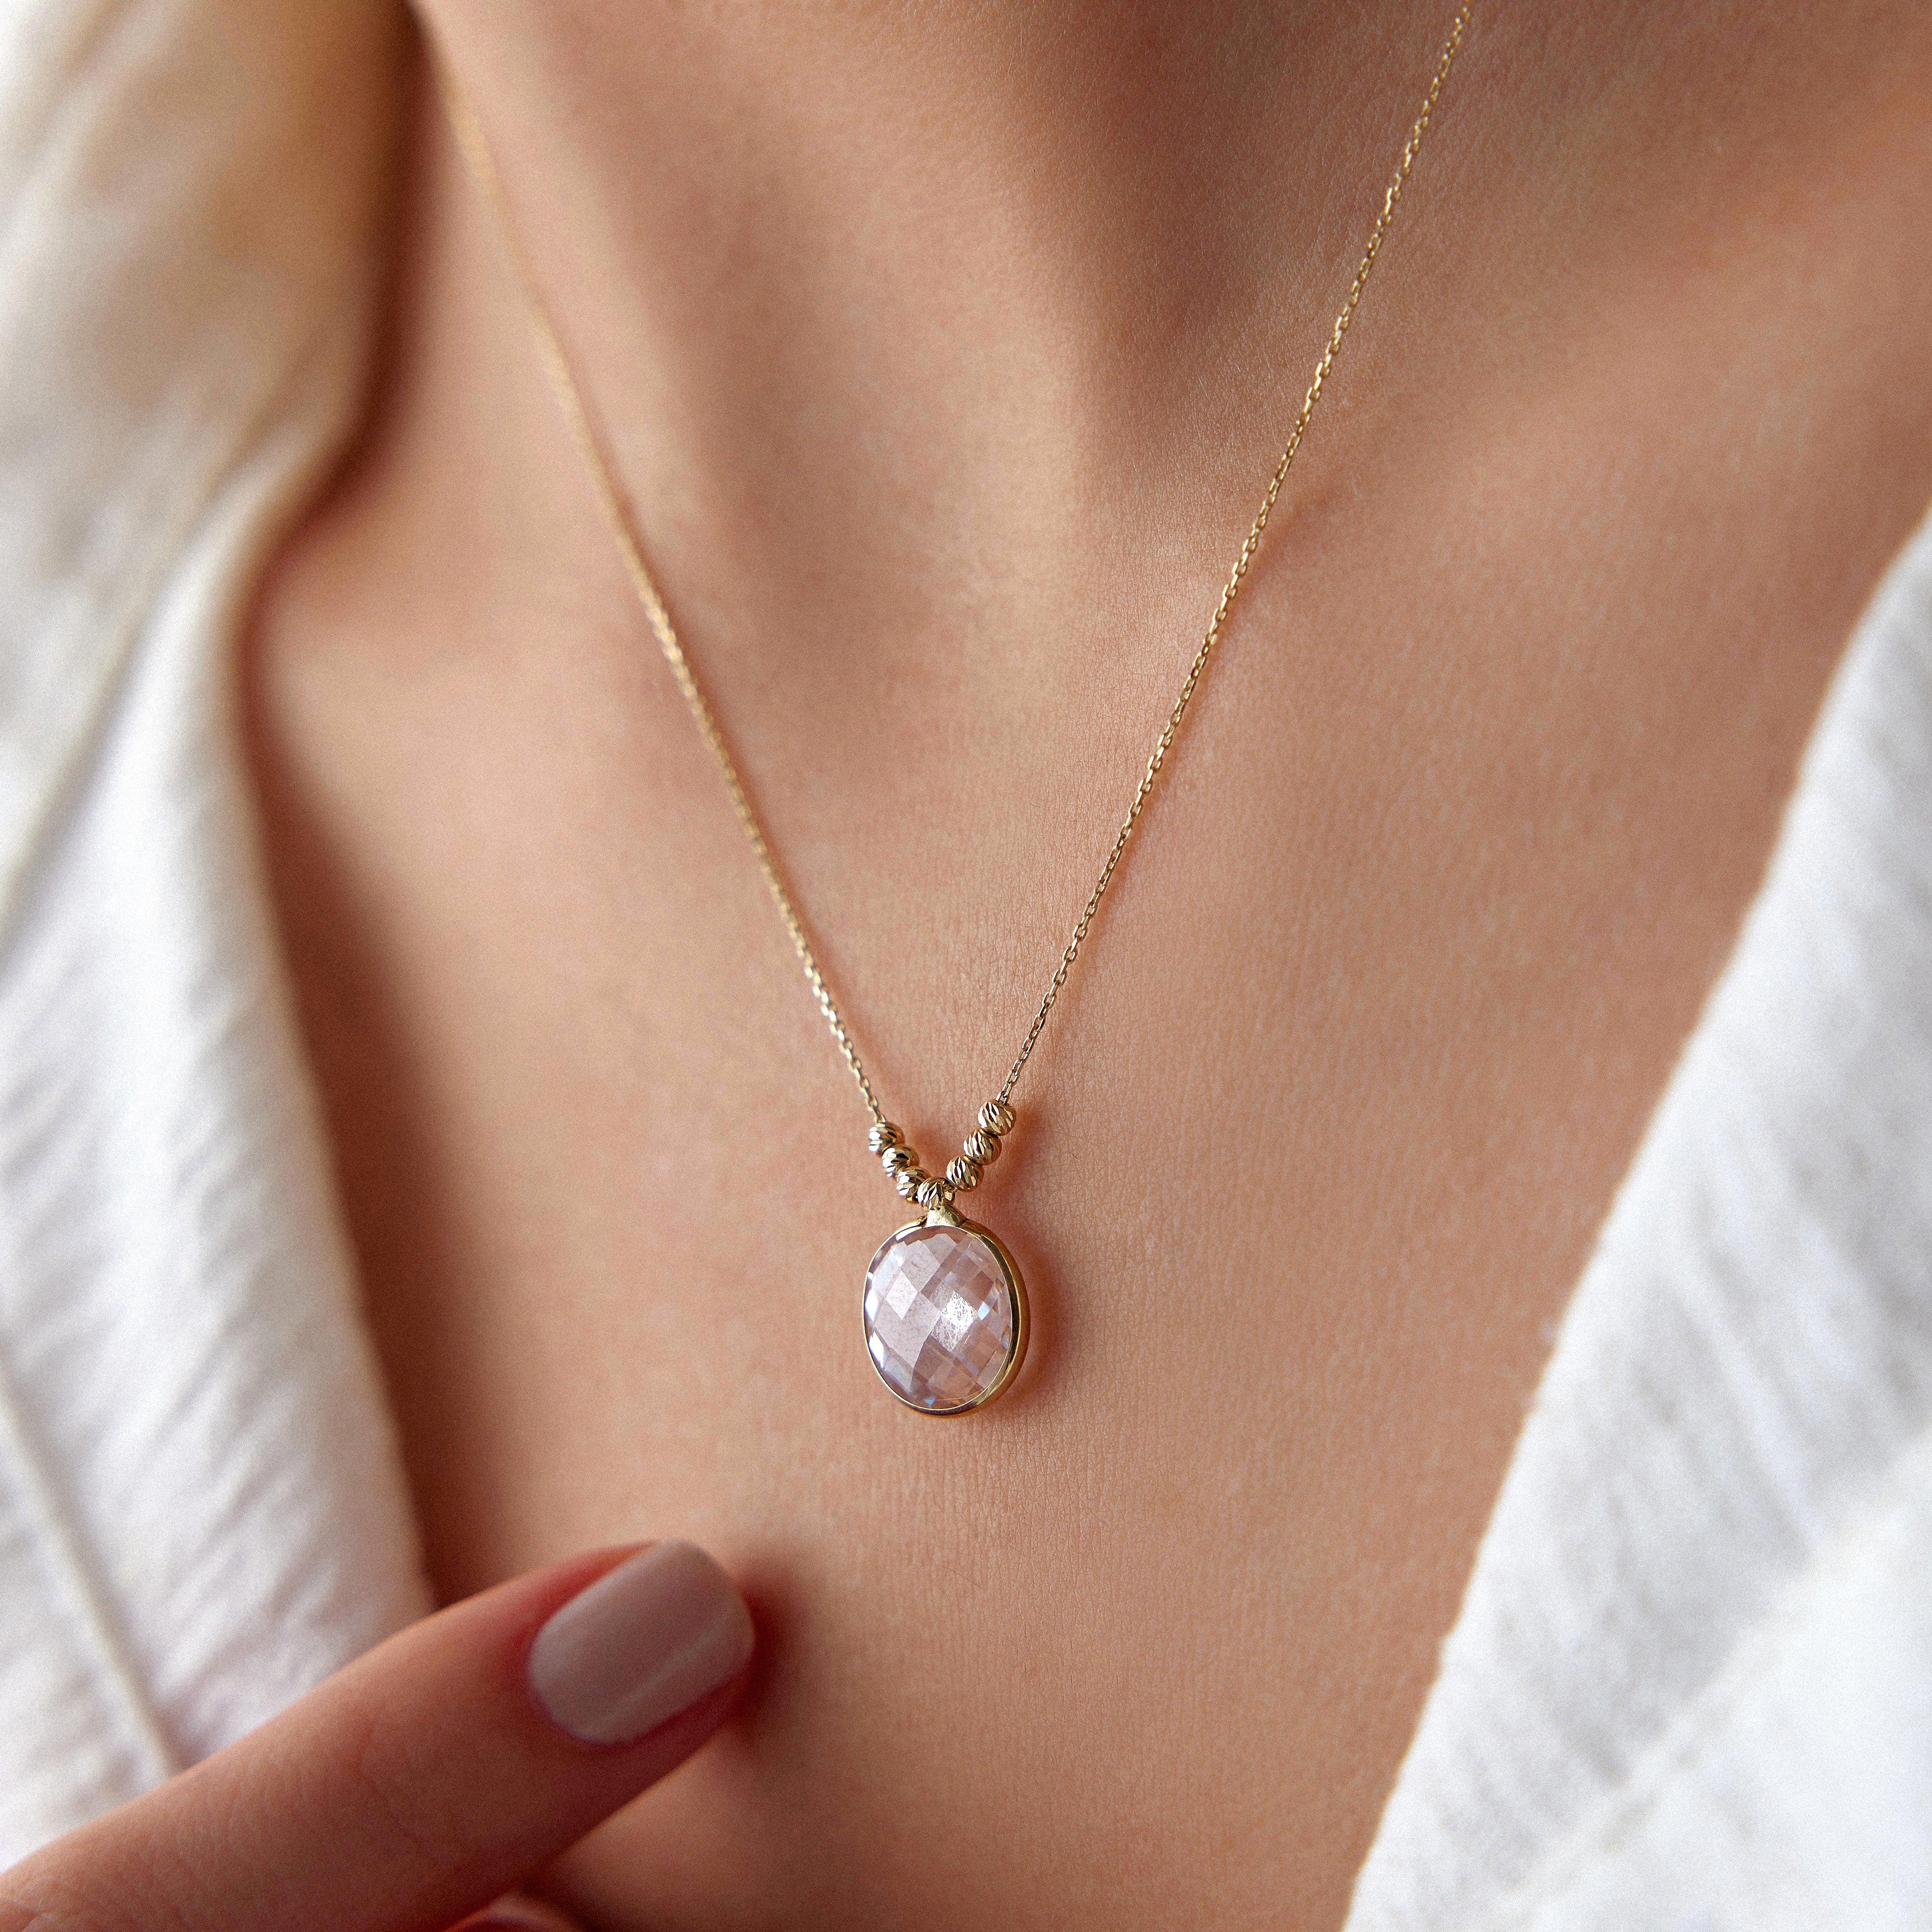 White Crystal Pendant Necklace in 14K Gold